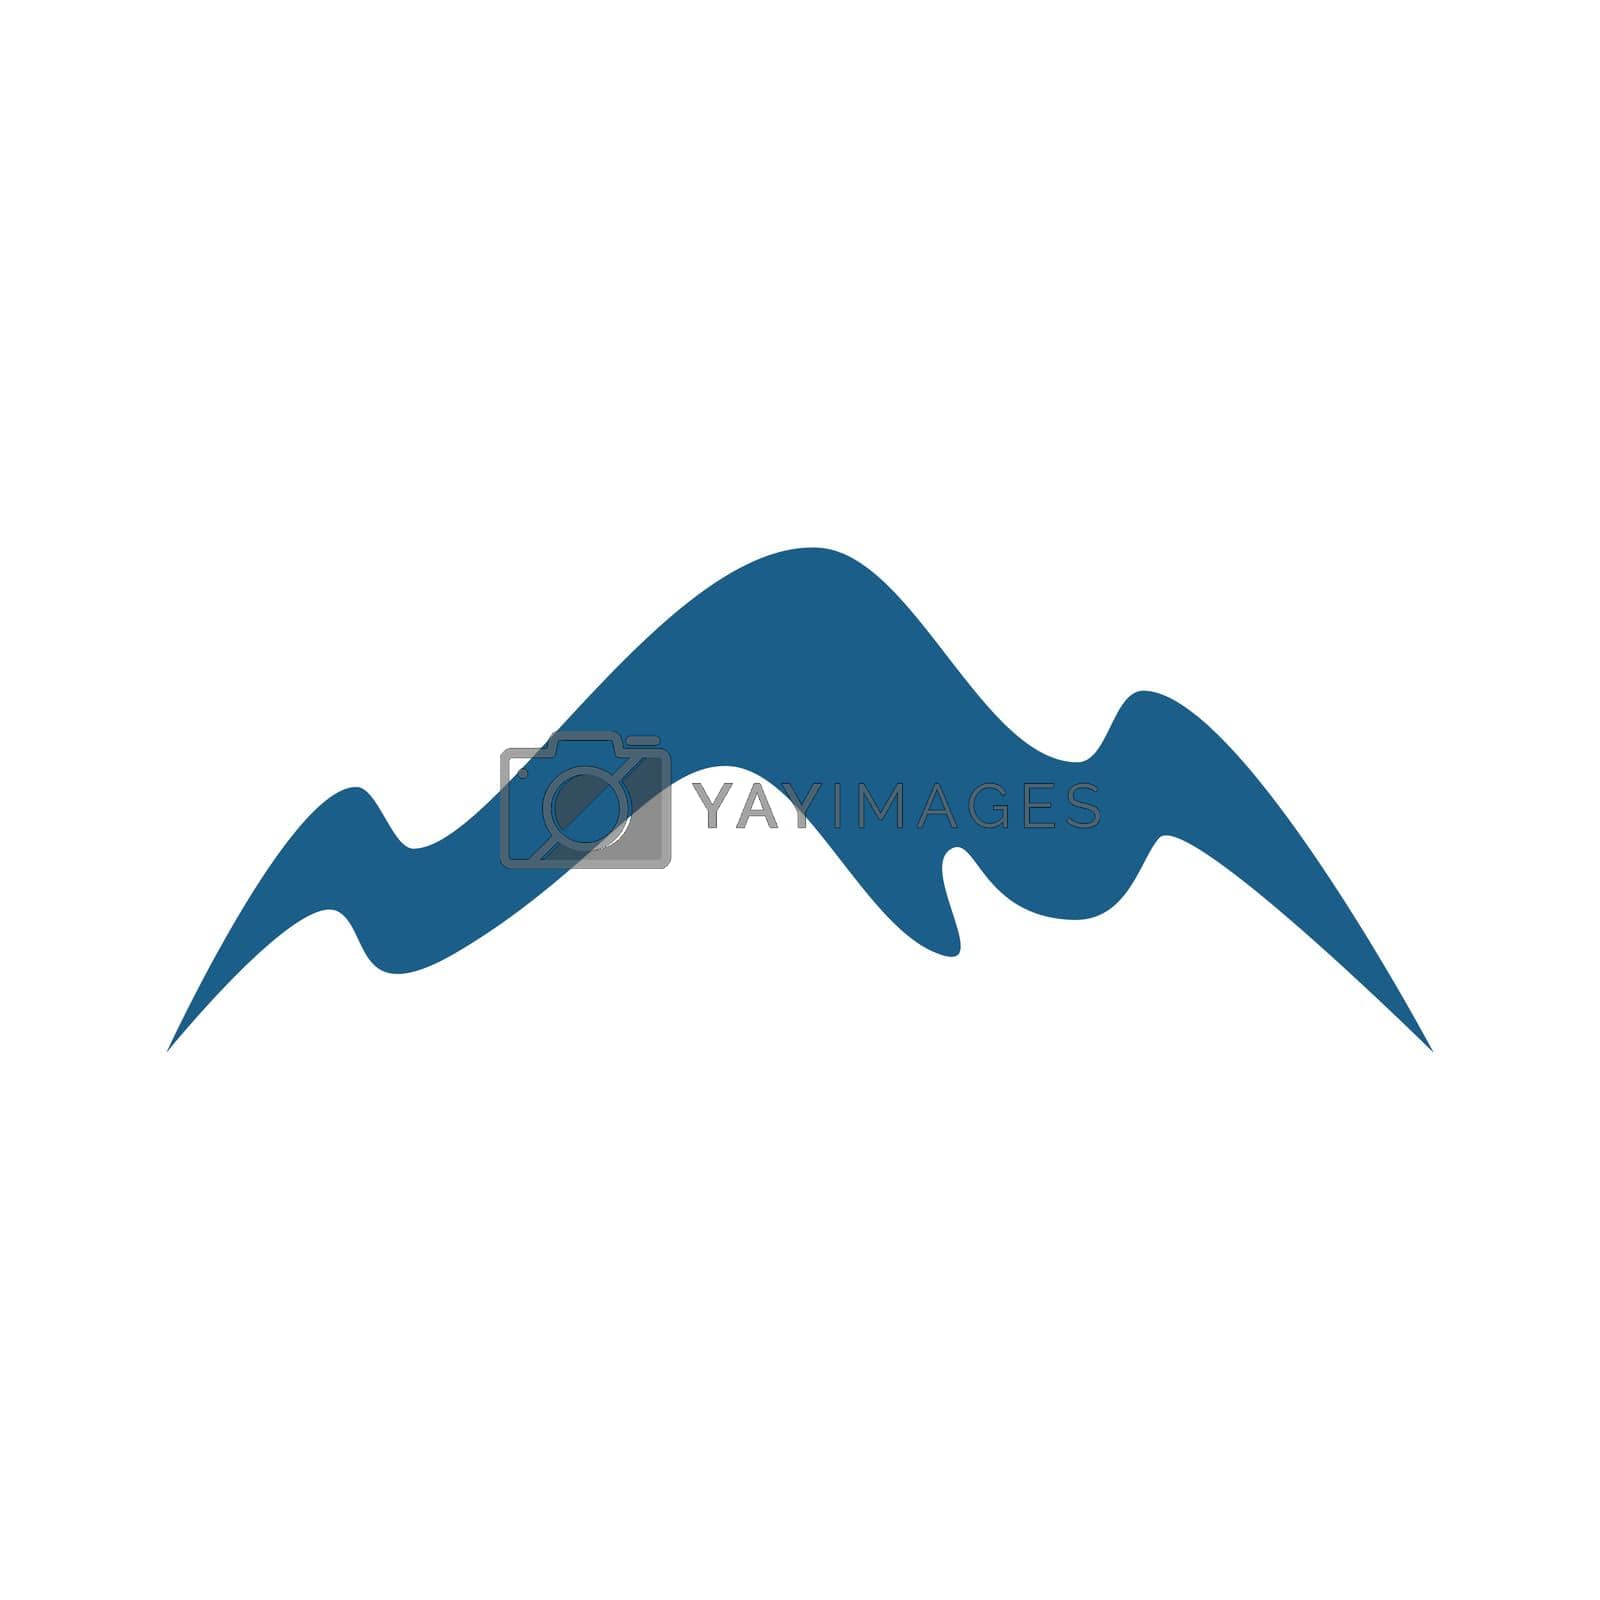 Royalty free image of Mountain illustration by awk